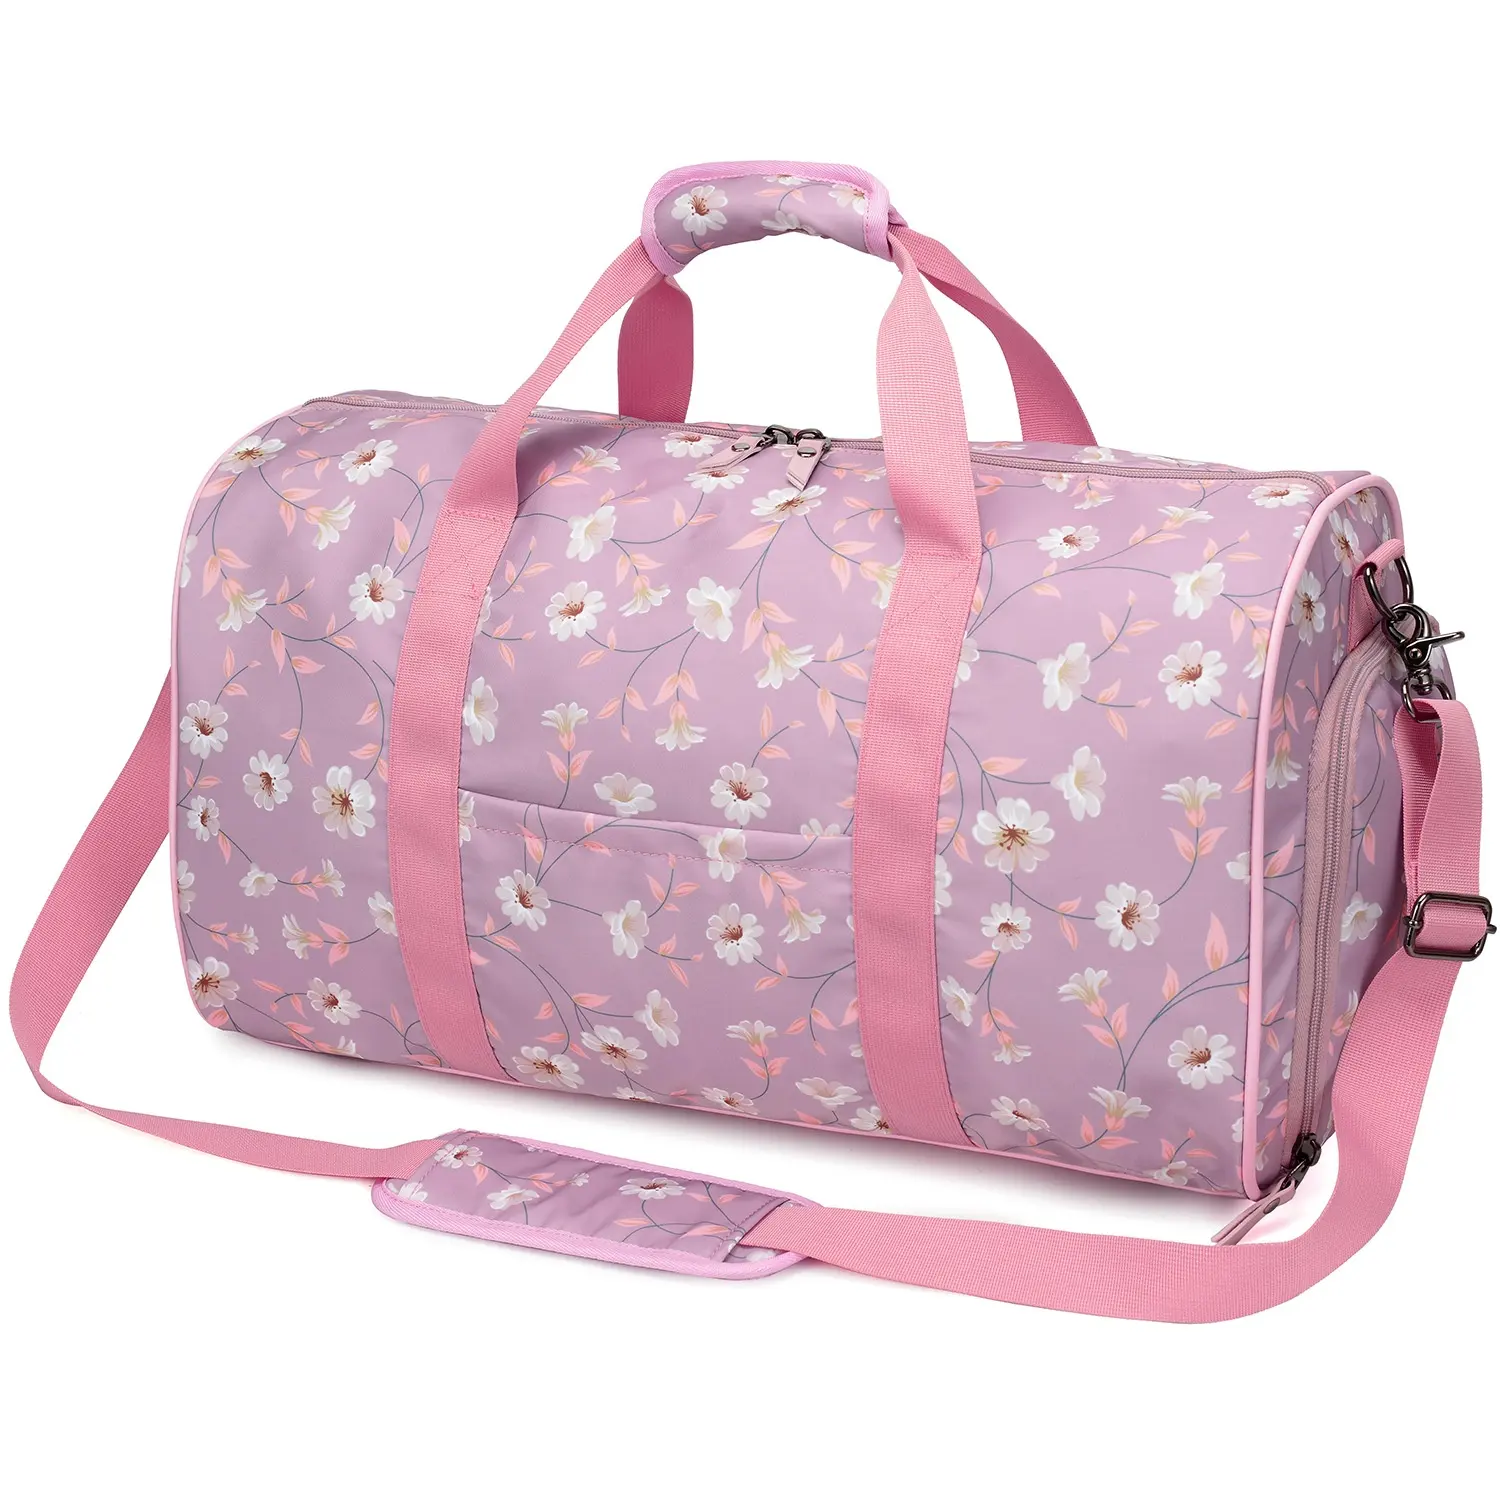 Custom duffle travel bag luggage over night pink duffel bag with shoe compartment gym weekend travel creative personalized bags